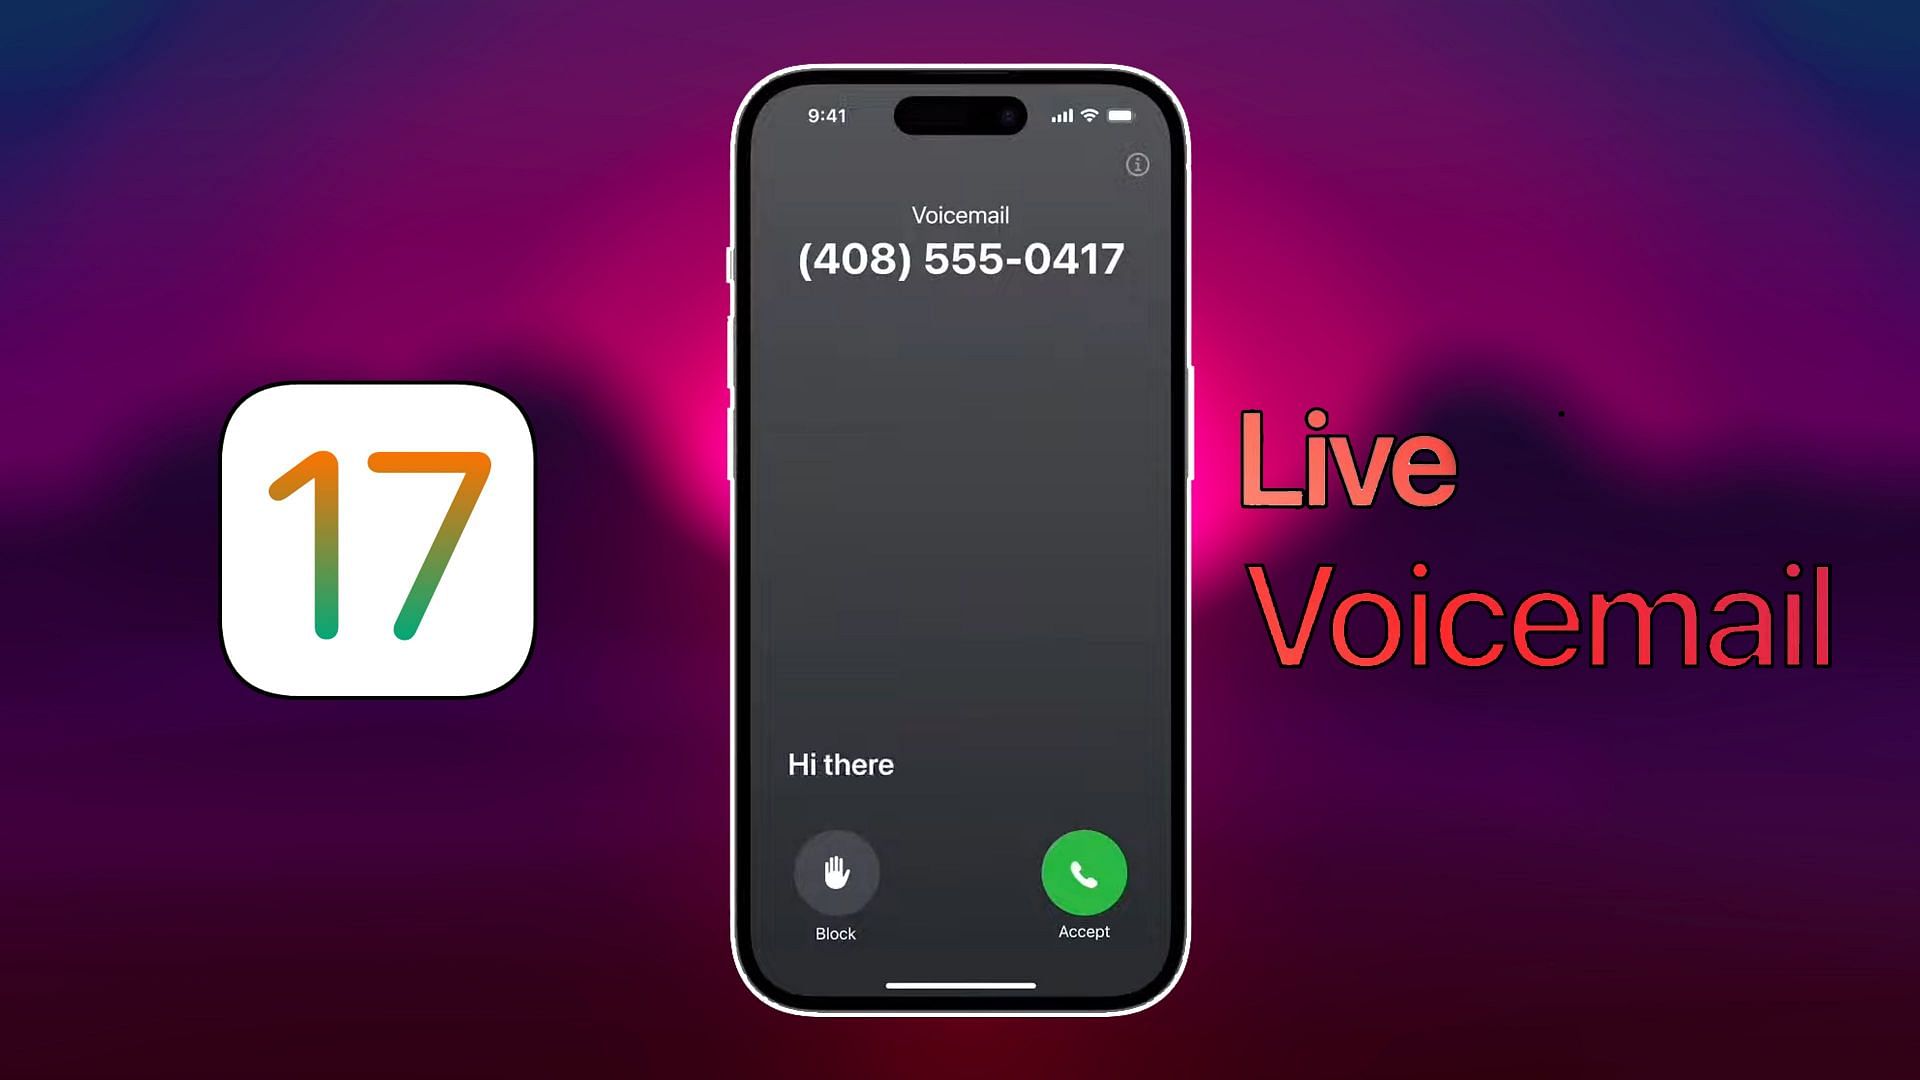 A guide on how to use Live Voicemail on iPhone with iOS 17 (Image via Apple)